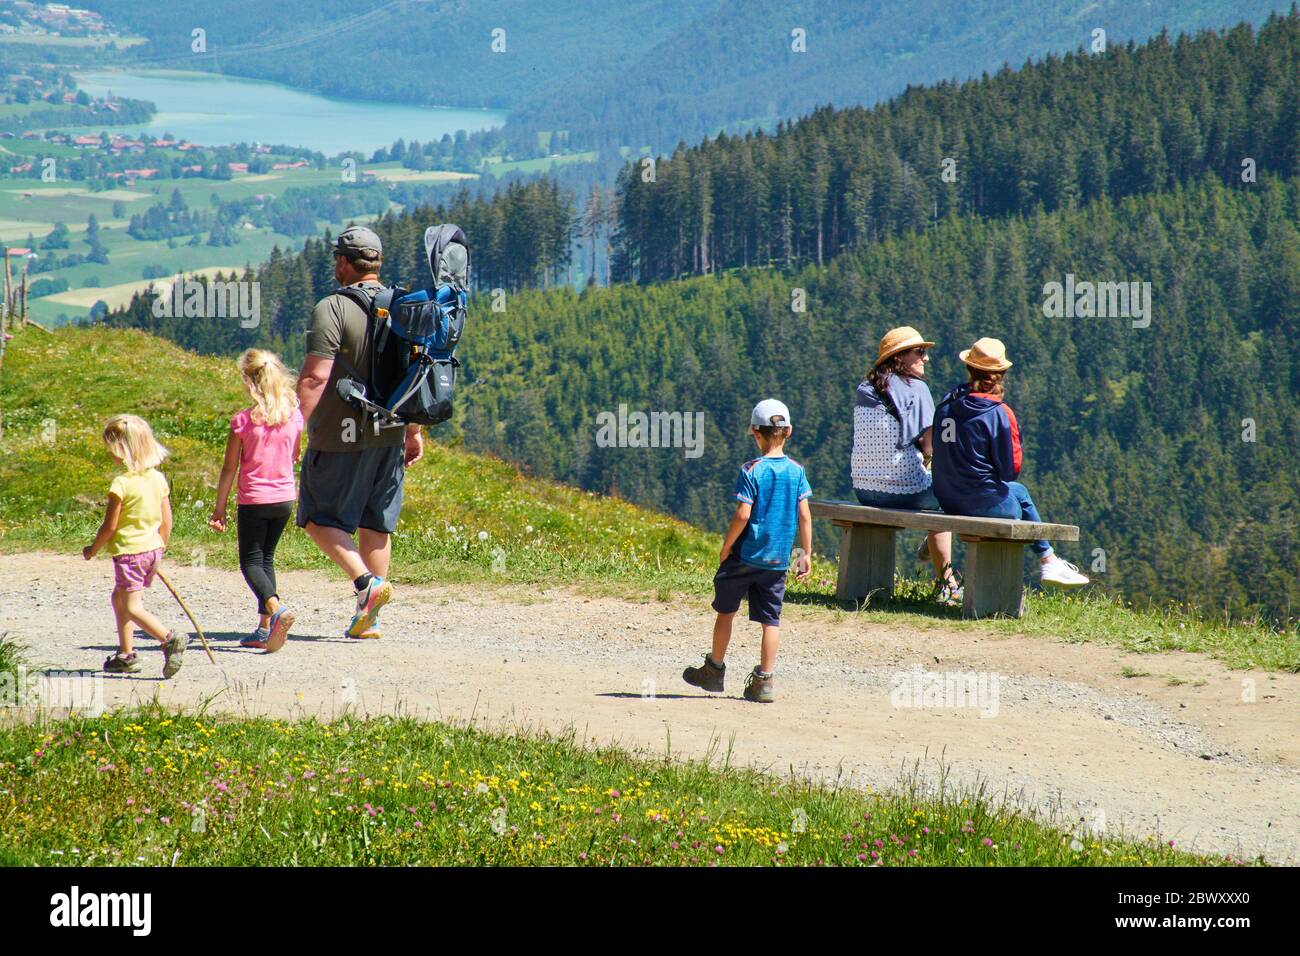 Nesselwang, Germany, 2nd of June, 2020. In Corona times, the cable car reopened and hiker are walking up to the Edelsberg peak with Sportheim Boeck mountain hut. © Peter Schatz / Alamy Live News Stock Photo